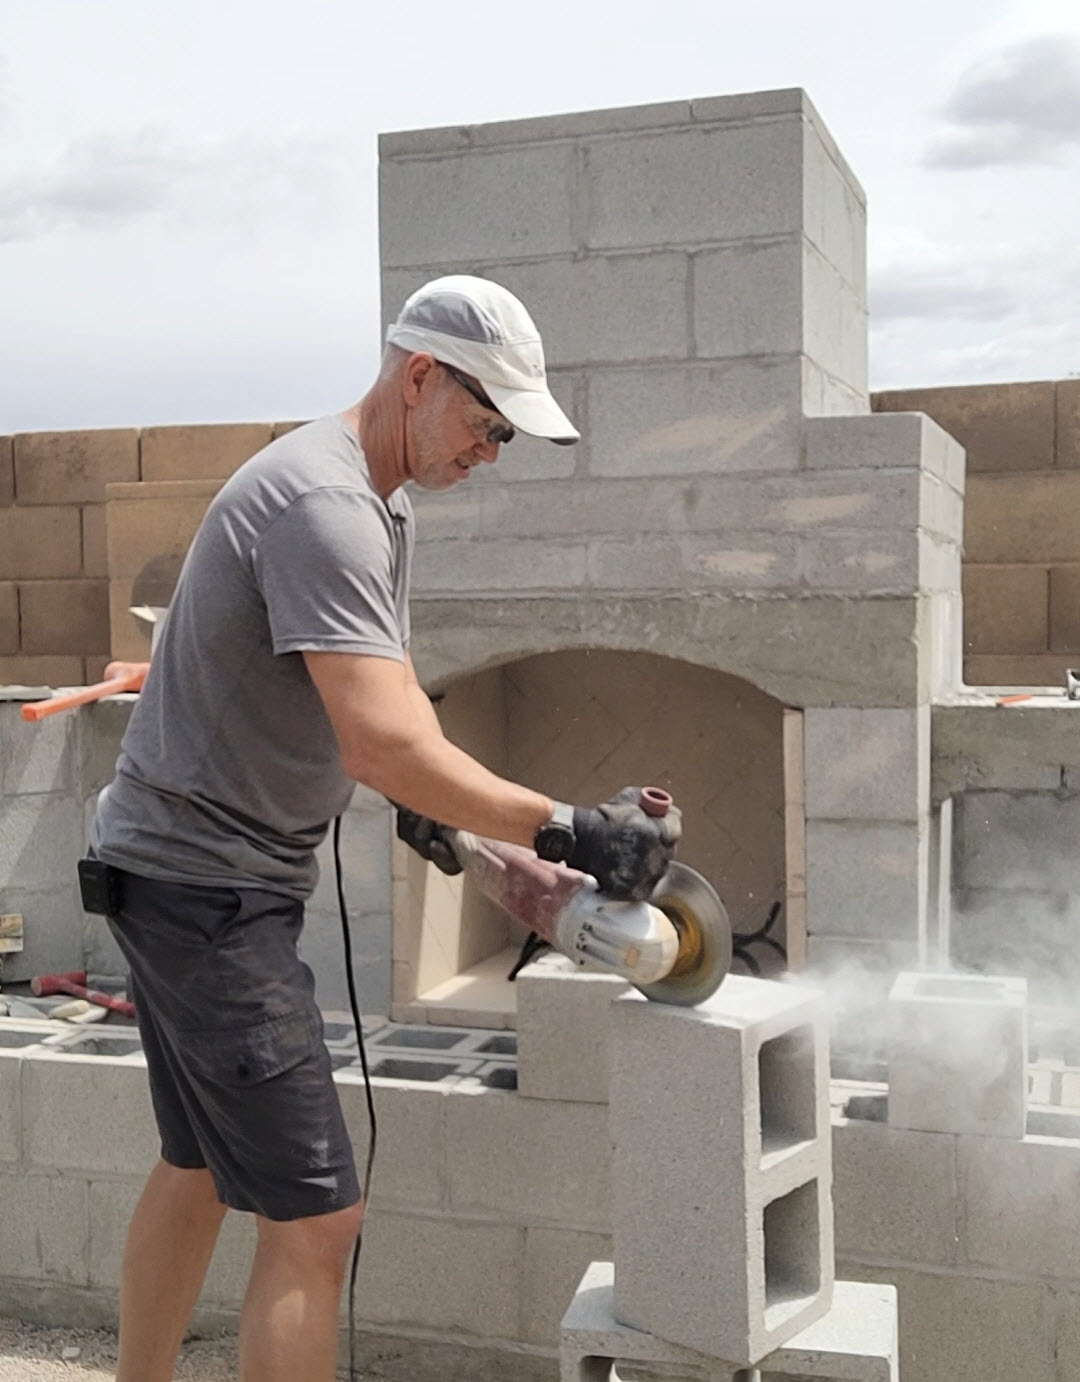 Man in white hat cutting cinderblock. Masonry DIY outdoor fireplace behind him. Diamond blade and grinder being used on construction.